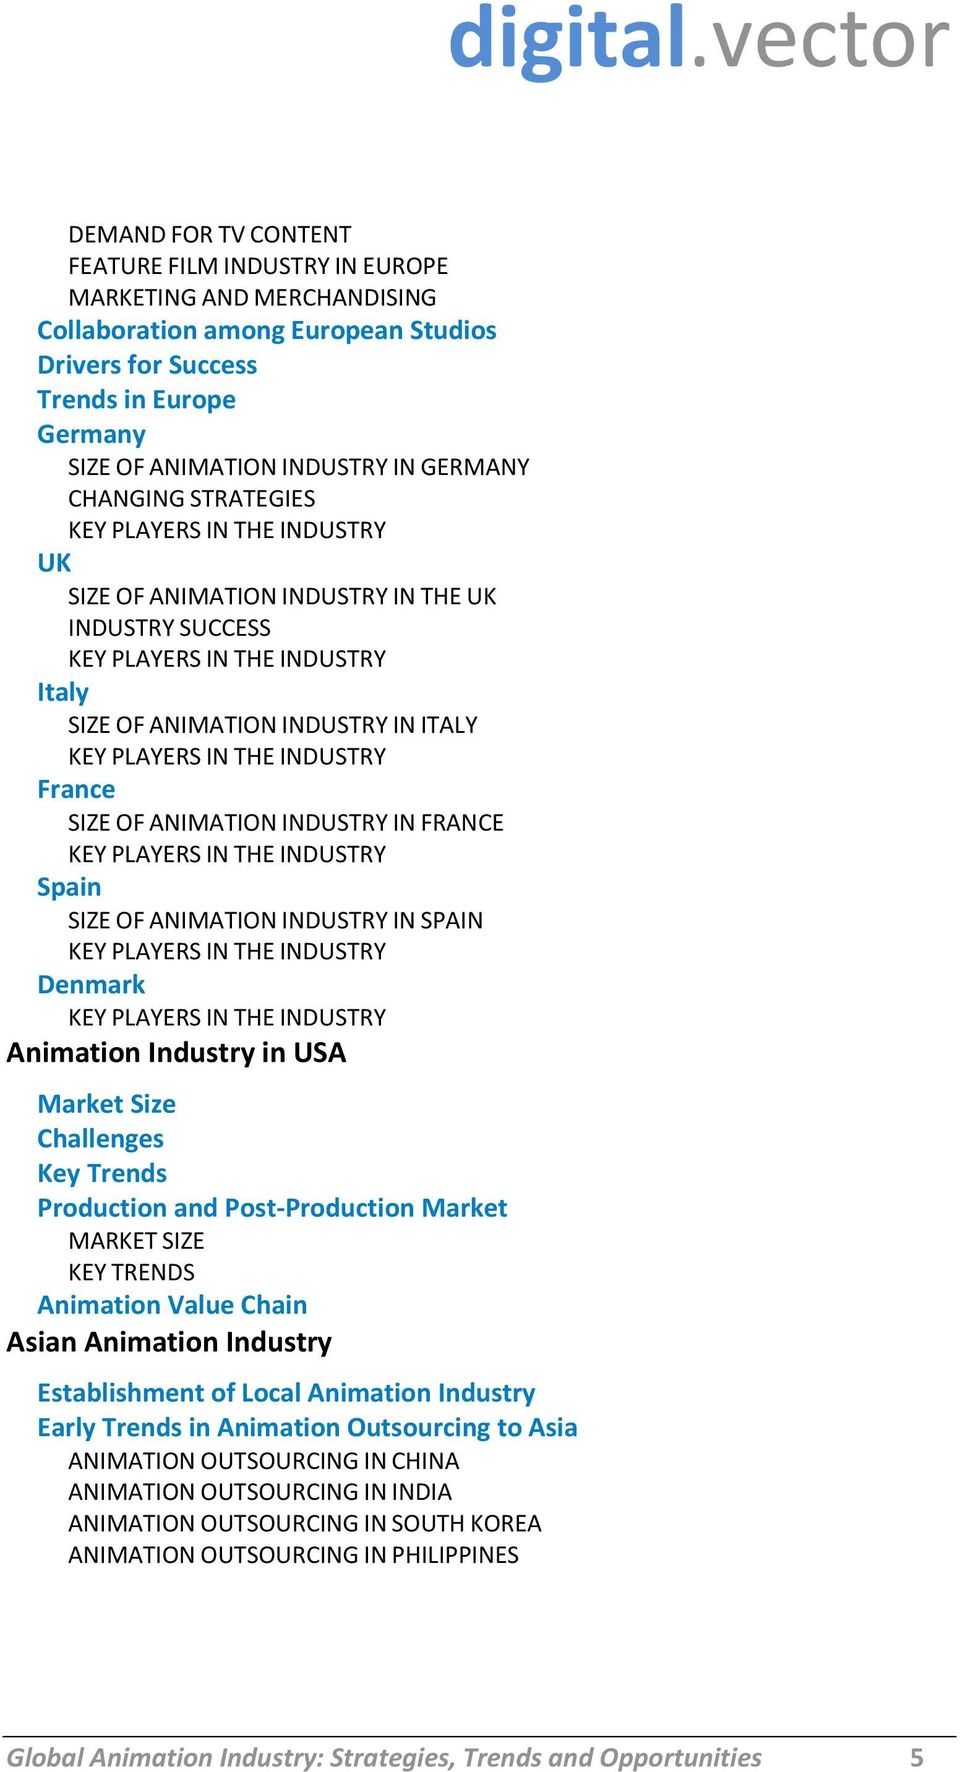  Global Animation Industry: Strategies, Trends and  Opportunities 1  - PDF Free Download